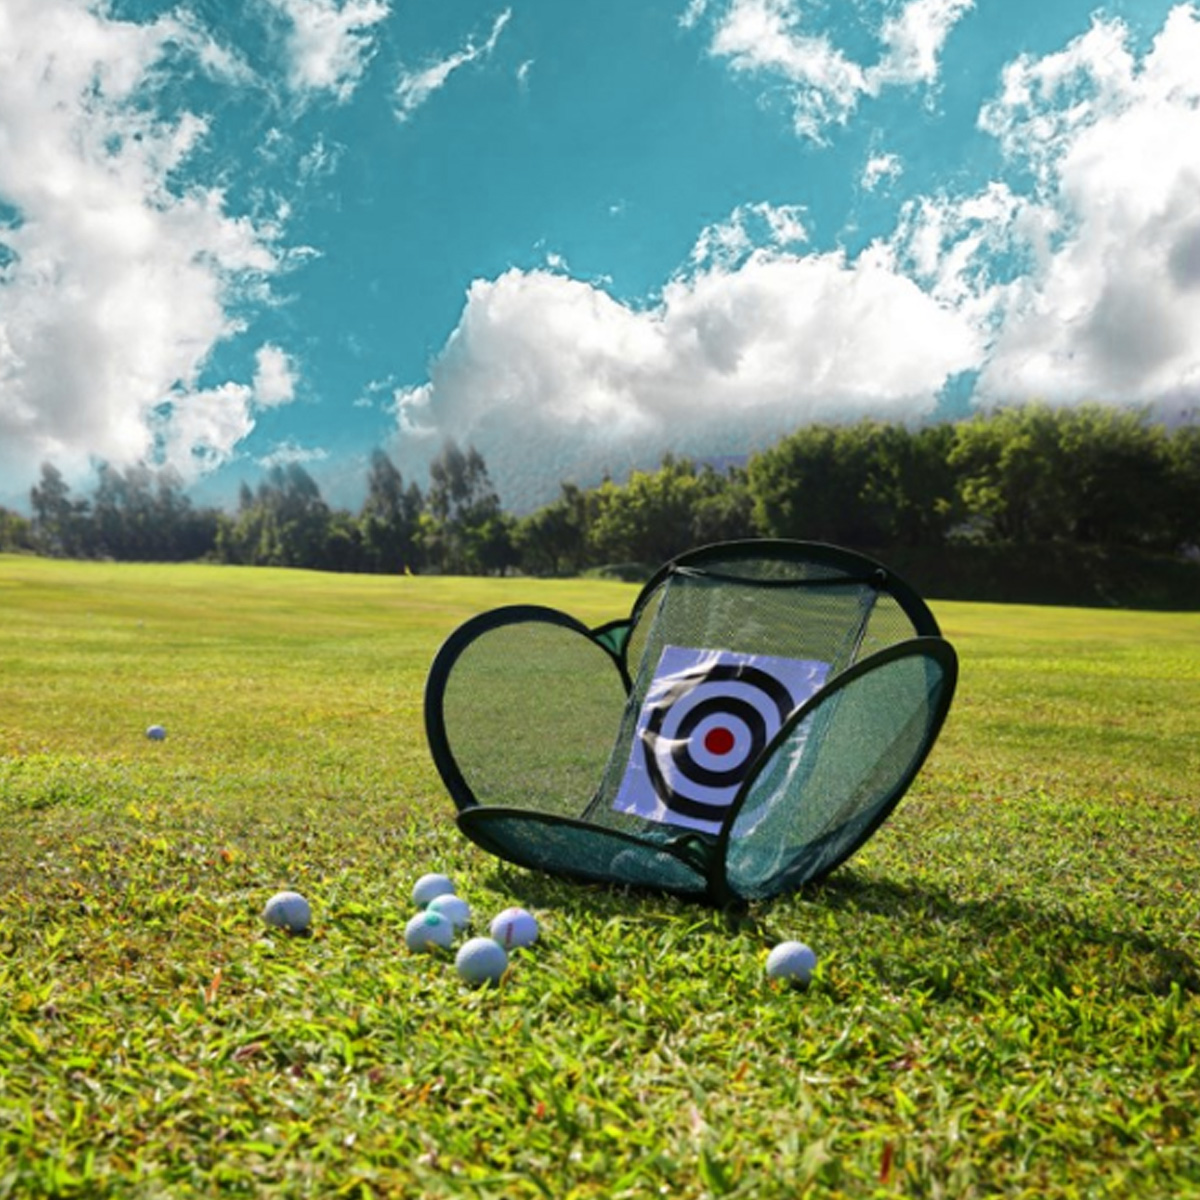 Foldable-Golf-Trainning-Net-Practice-Target-Net-With-Storage-Bag-Hitting-Cage-Indoor-Outdoor-Chippin-1656807-3